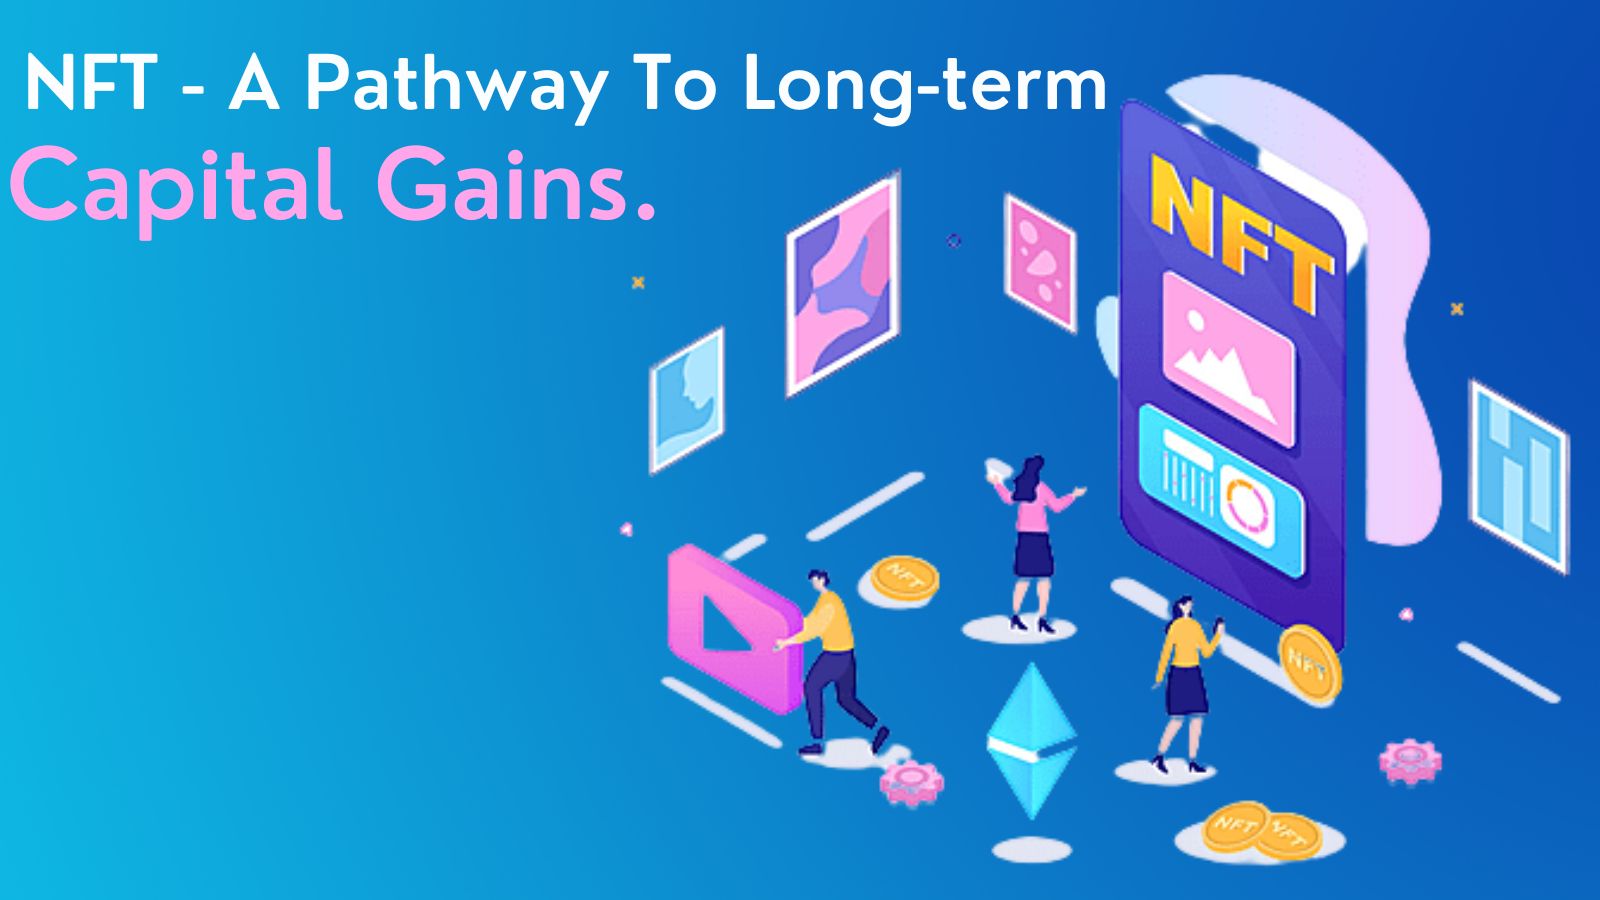 NFT - A Pathway To Long-term Capital Gains.-7cb51f0f